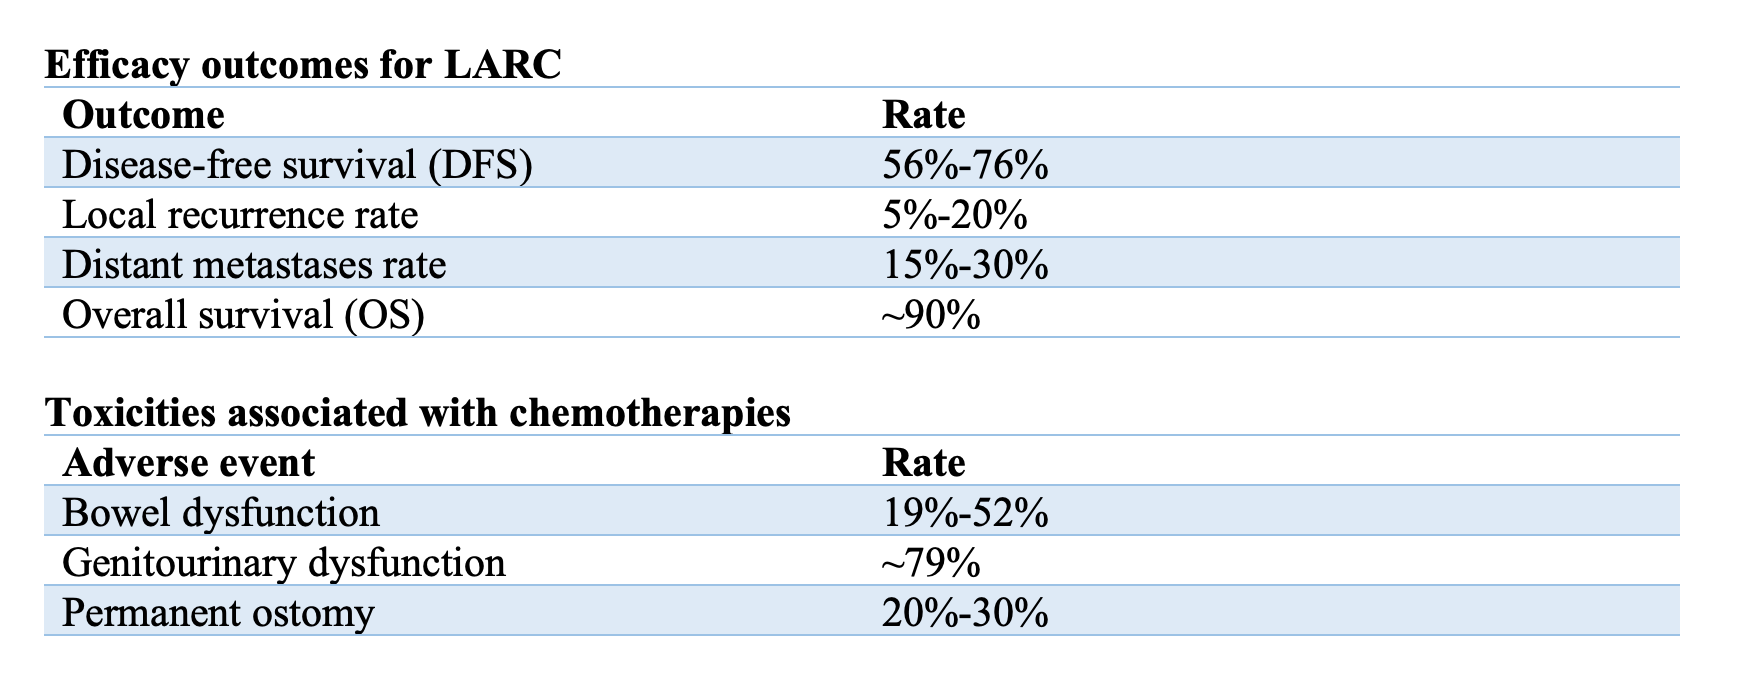 LARC outcomes. rectal cancer, dostarlimab